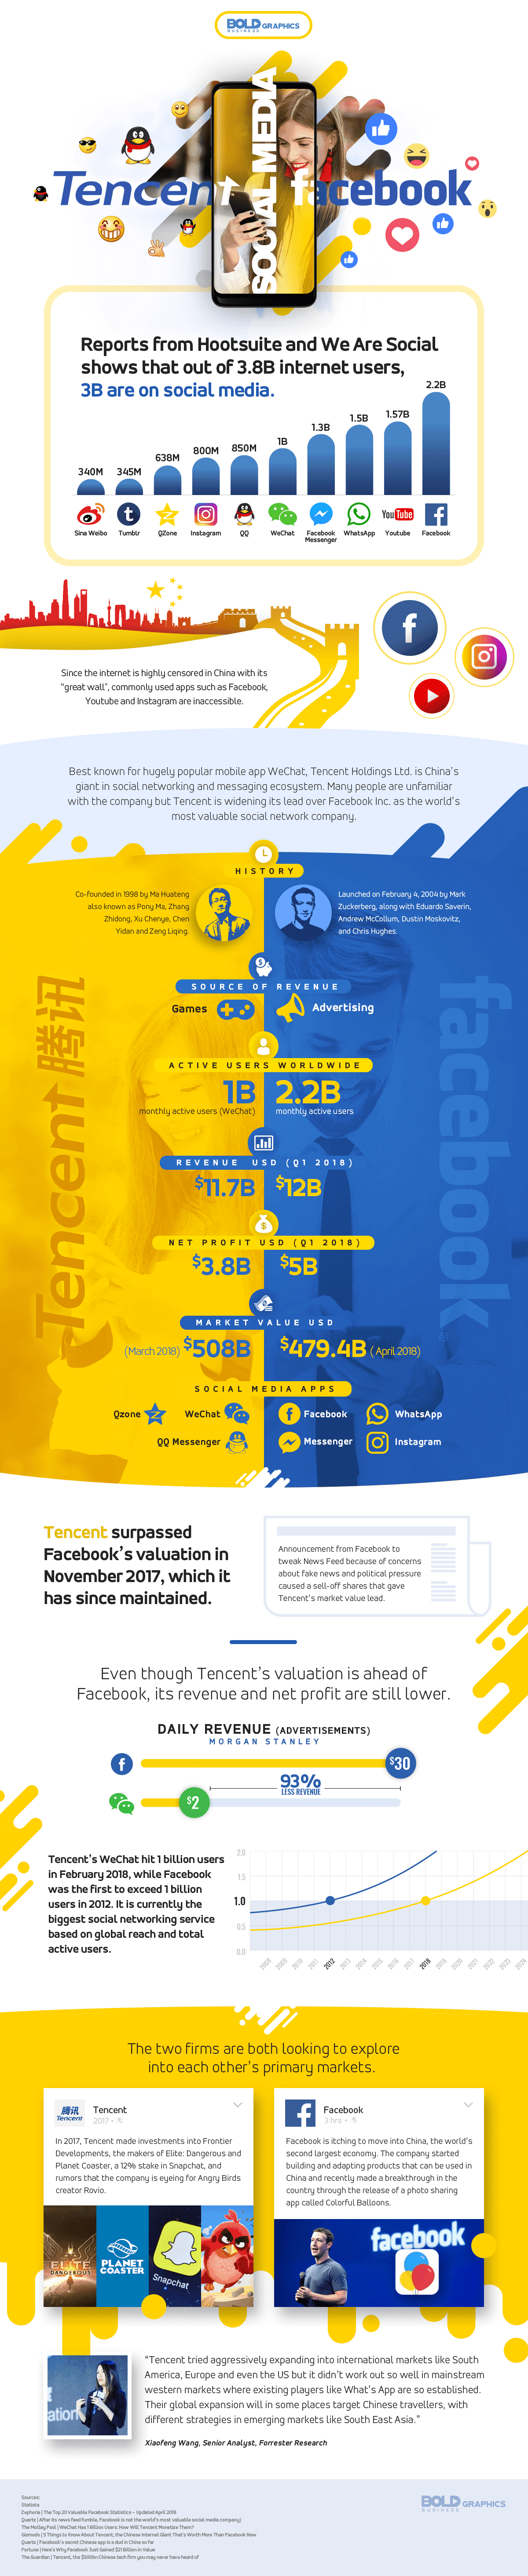 Tencent vs Facebook Infographic